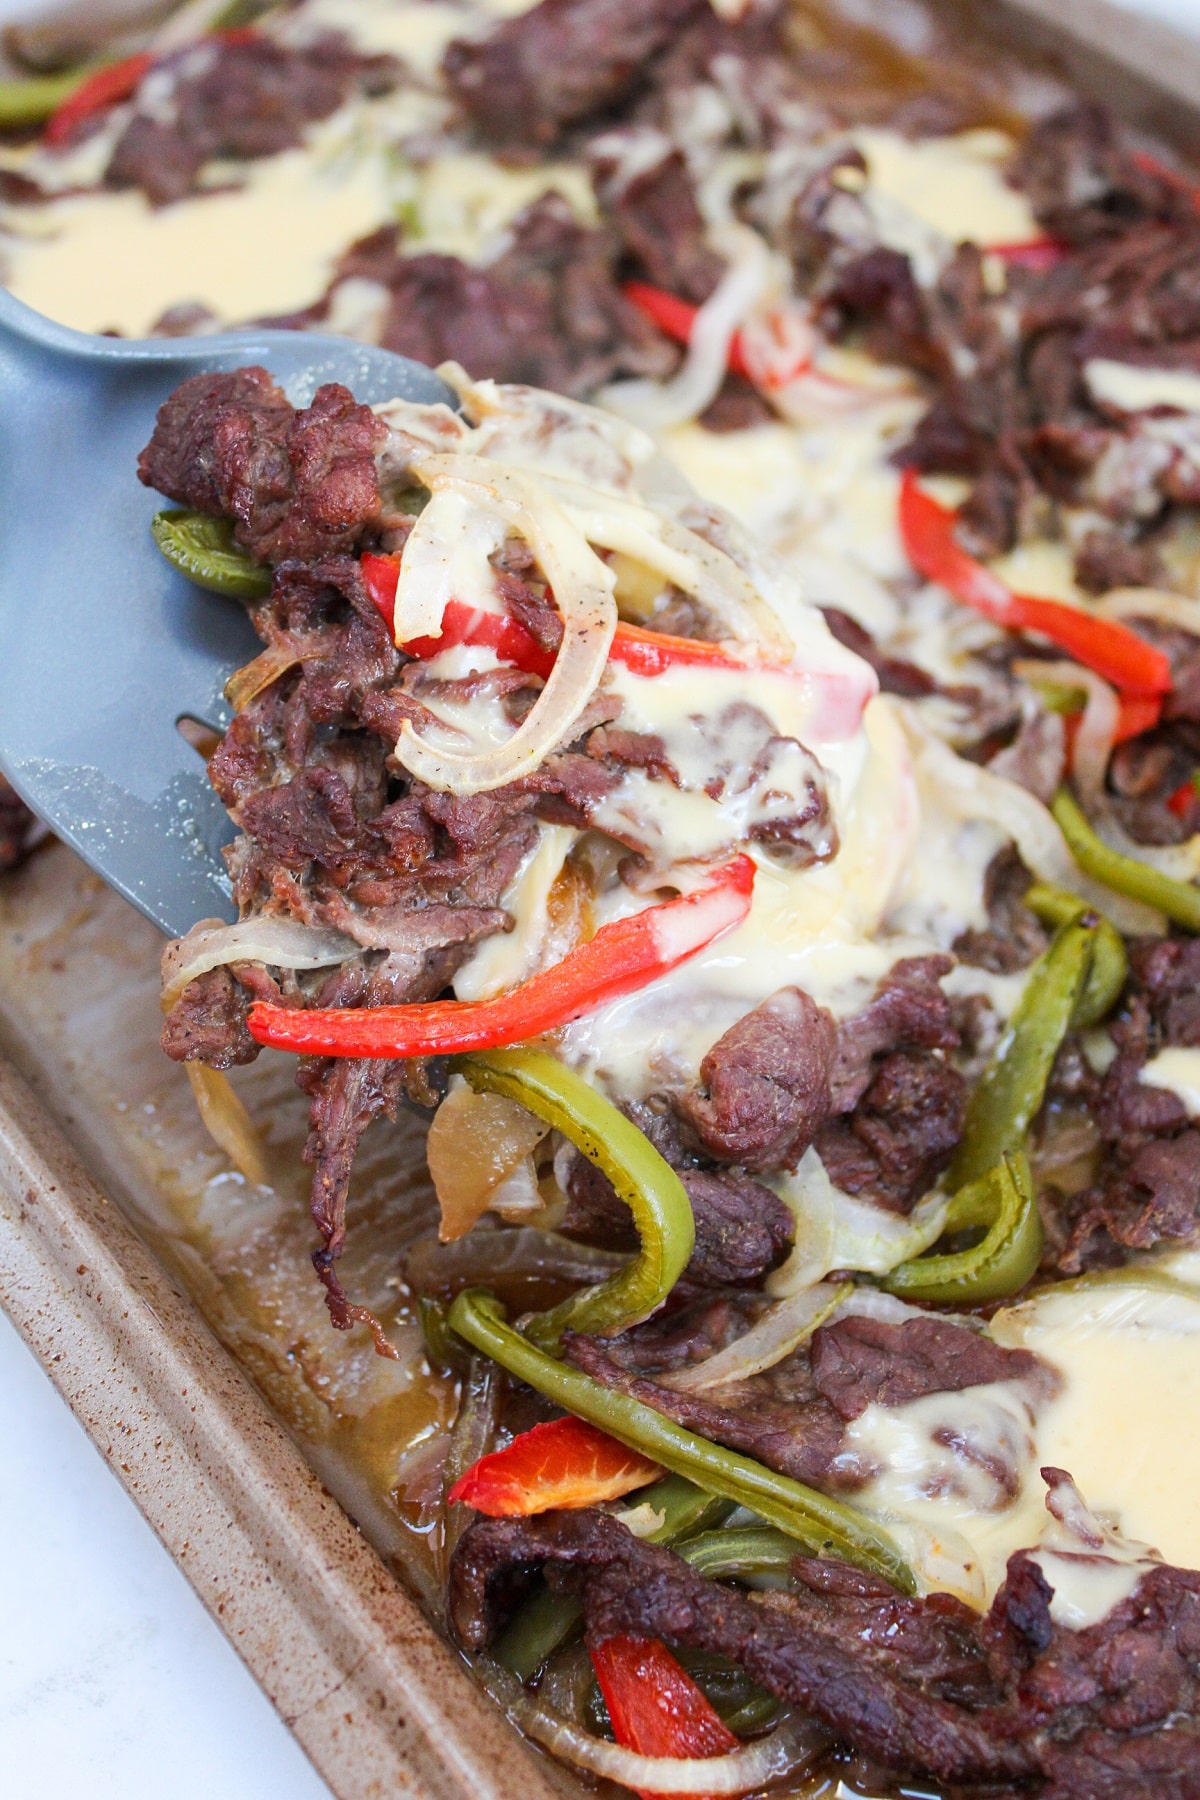 cooked sliced beer with cooked red and green peppers on a sheet pan. The sandwich filling is topped with a melted white cheese sauce. There is a spatula scooping the cheesesteak from the pan.